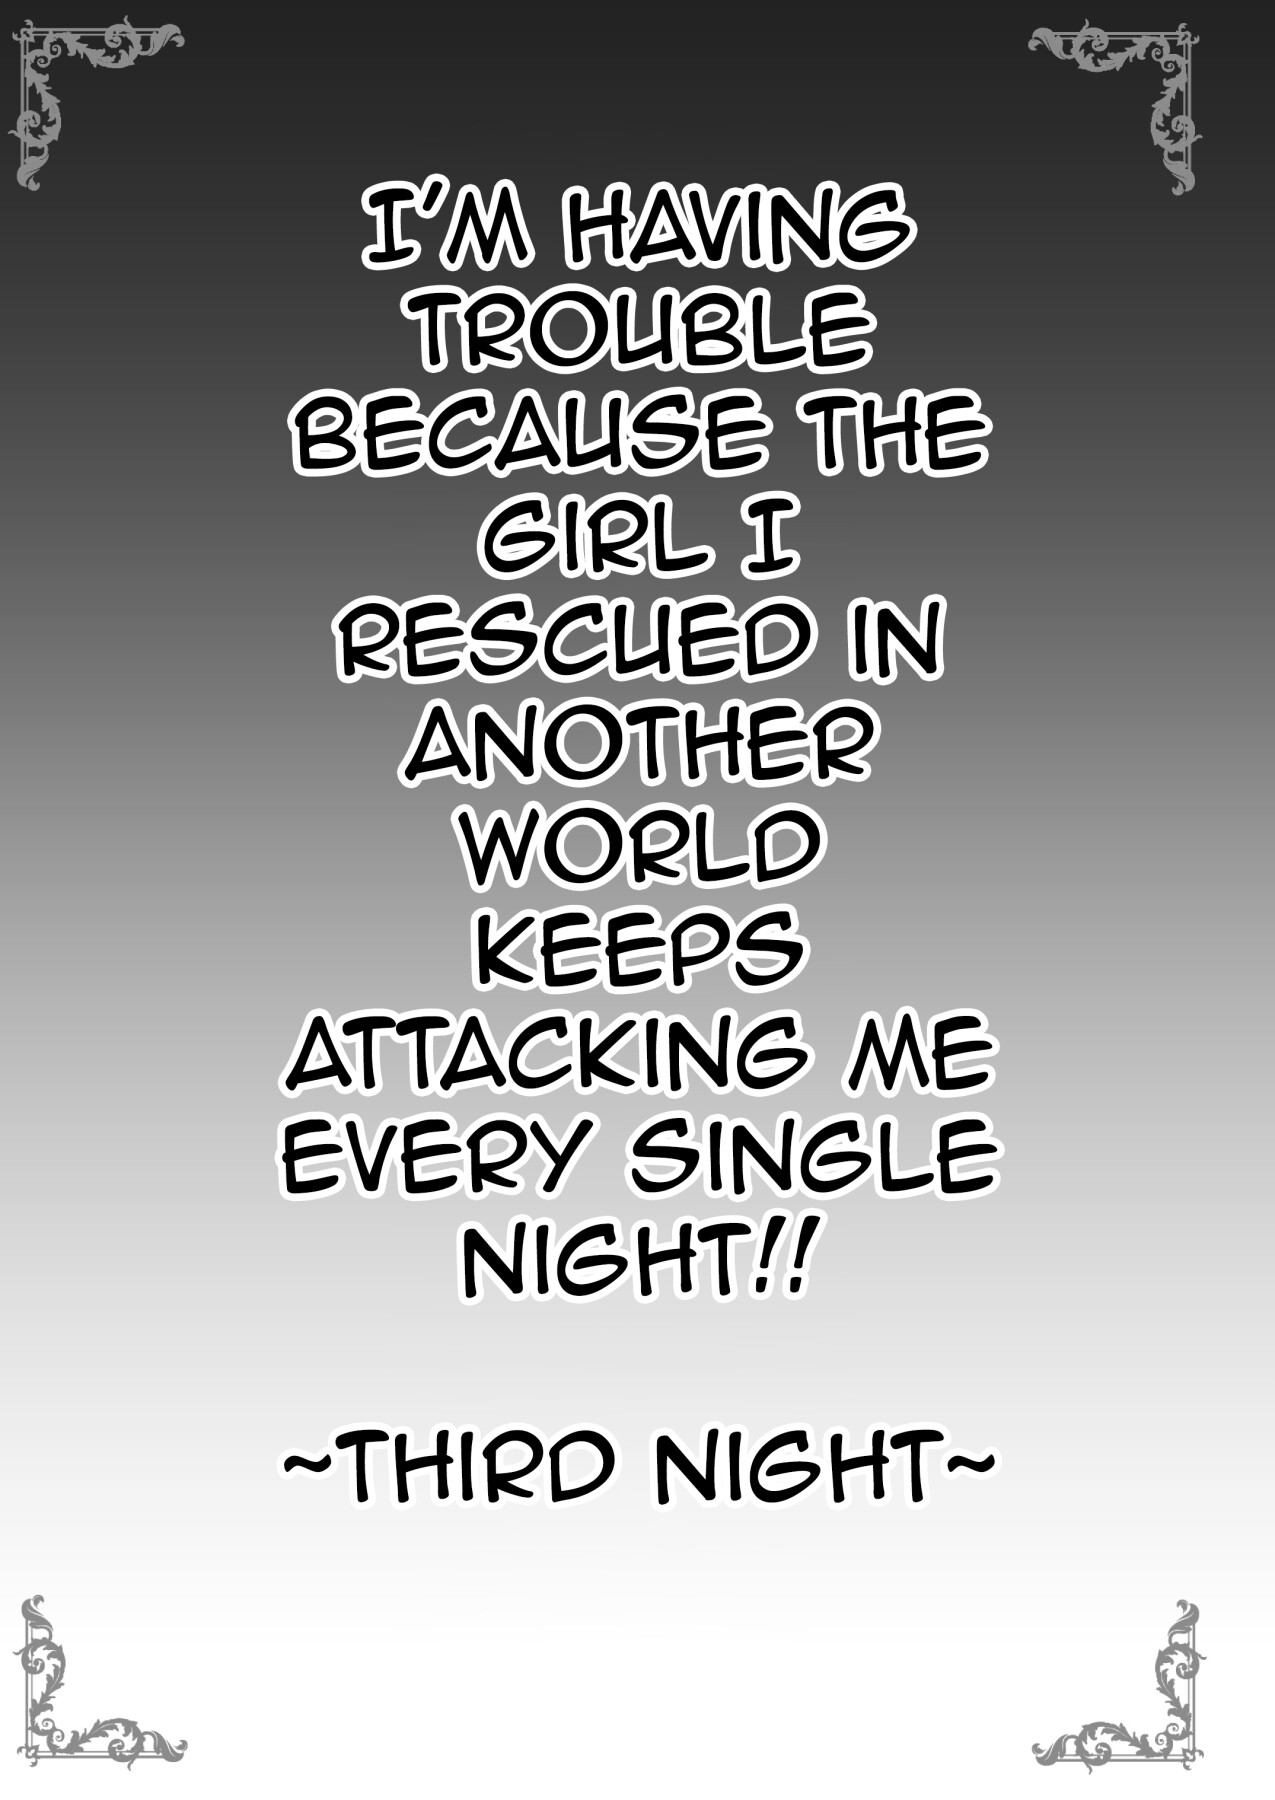 Hentai Manga Comic-The Girl I Rescued in Another World is Assaulting Me Relentlessly Every Night and It's Bothering Me!! Third Night-Read-2